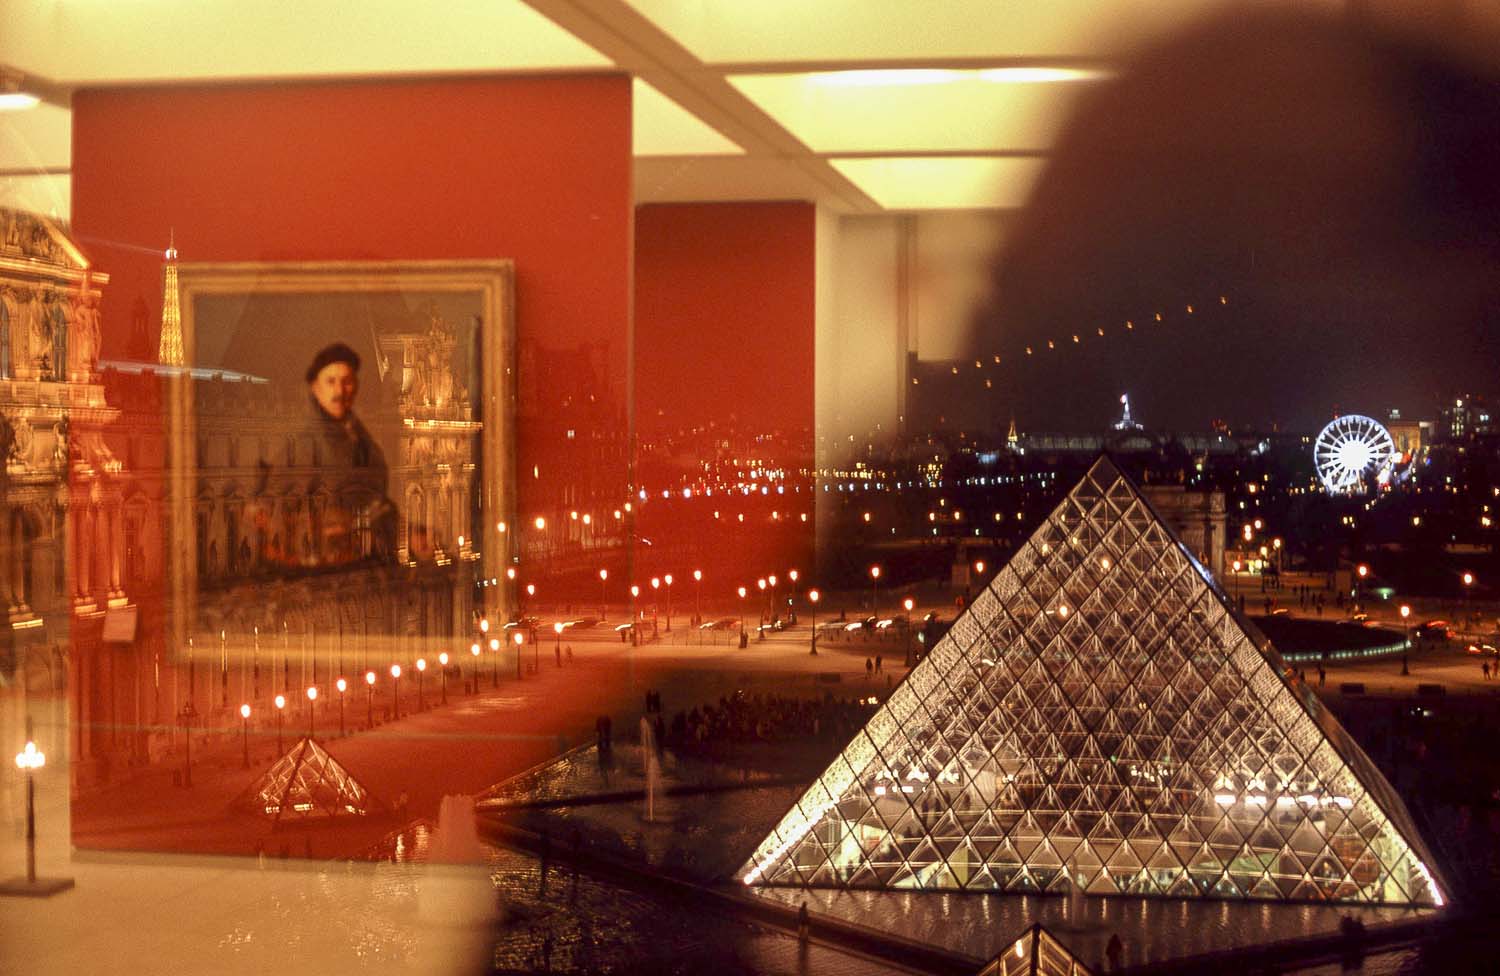 Paris - Photo taken from an interior window of the Louvre Museum one part reflects a painting from the inside and the other part the outside with the pyramid